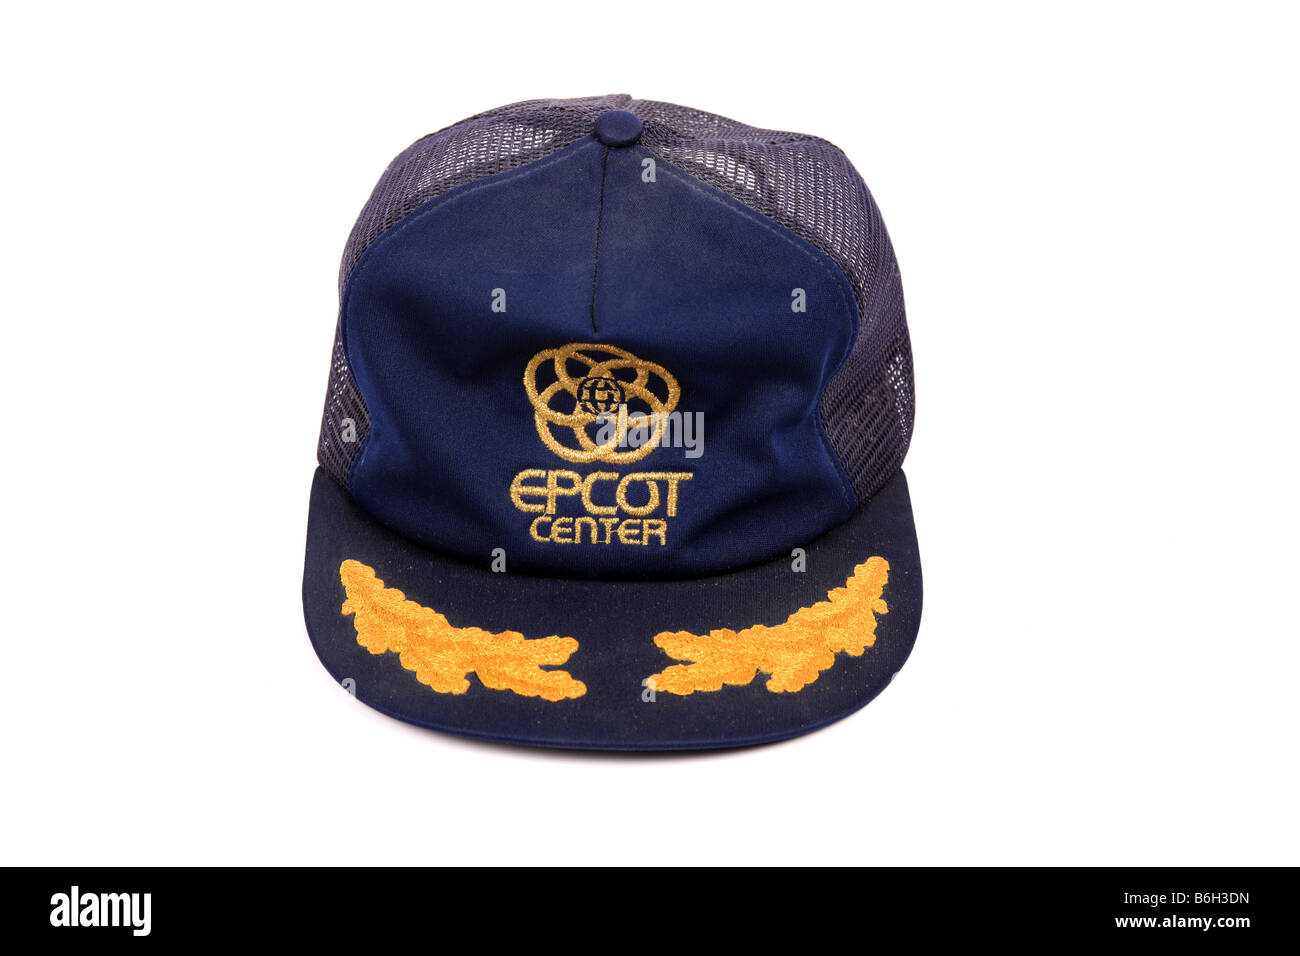 Baseball style hat from the Epcot Center in Florida Stock Photo